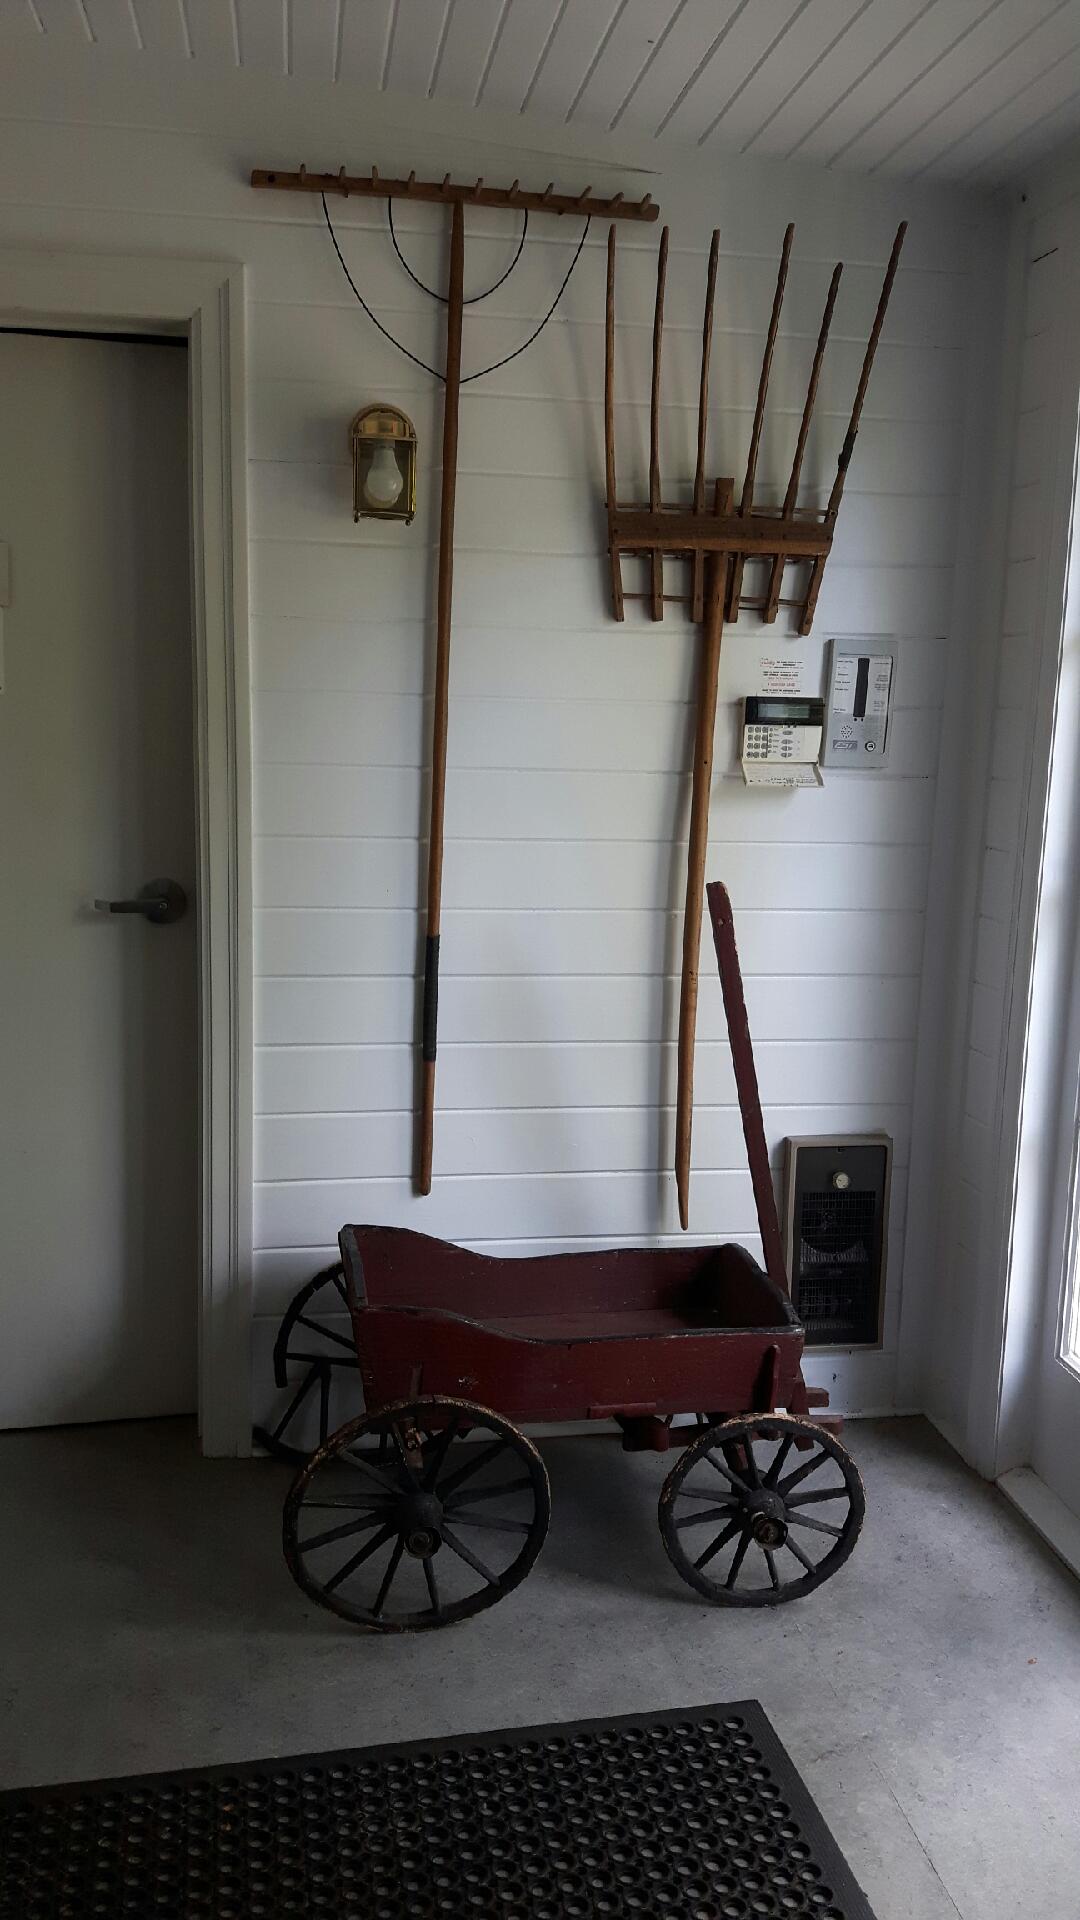  Inside the west entrance is a display of old gardening implements 